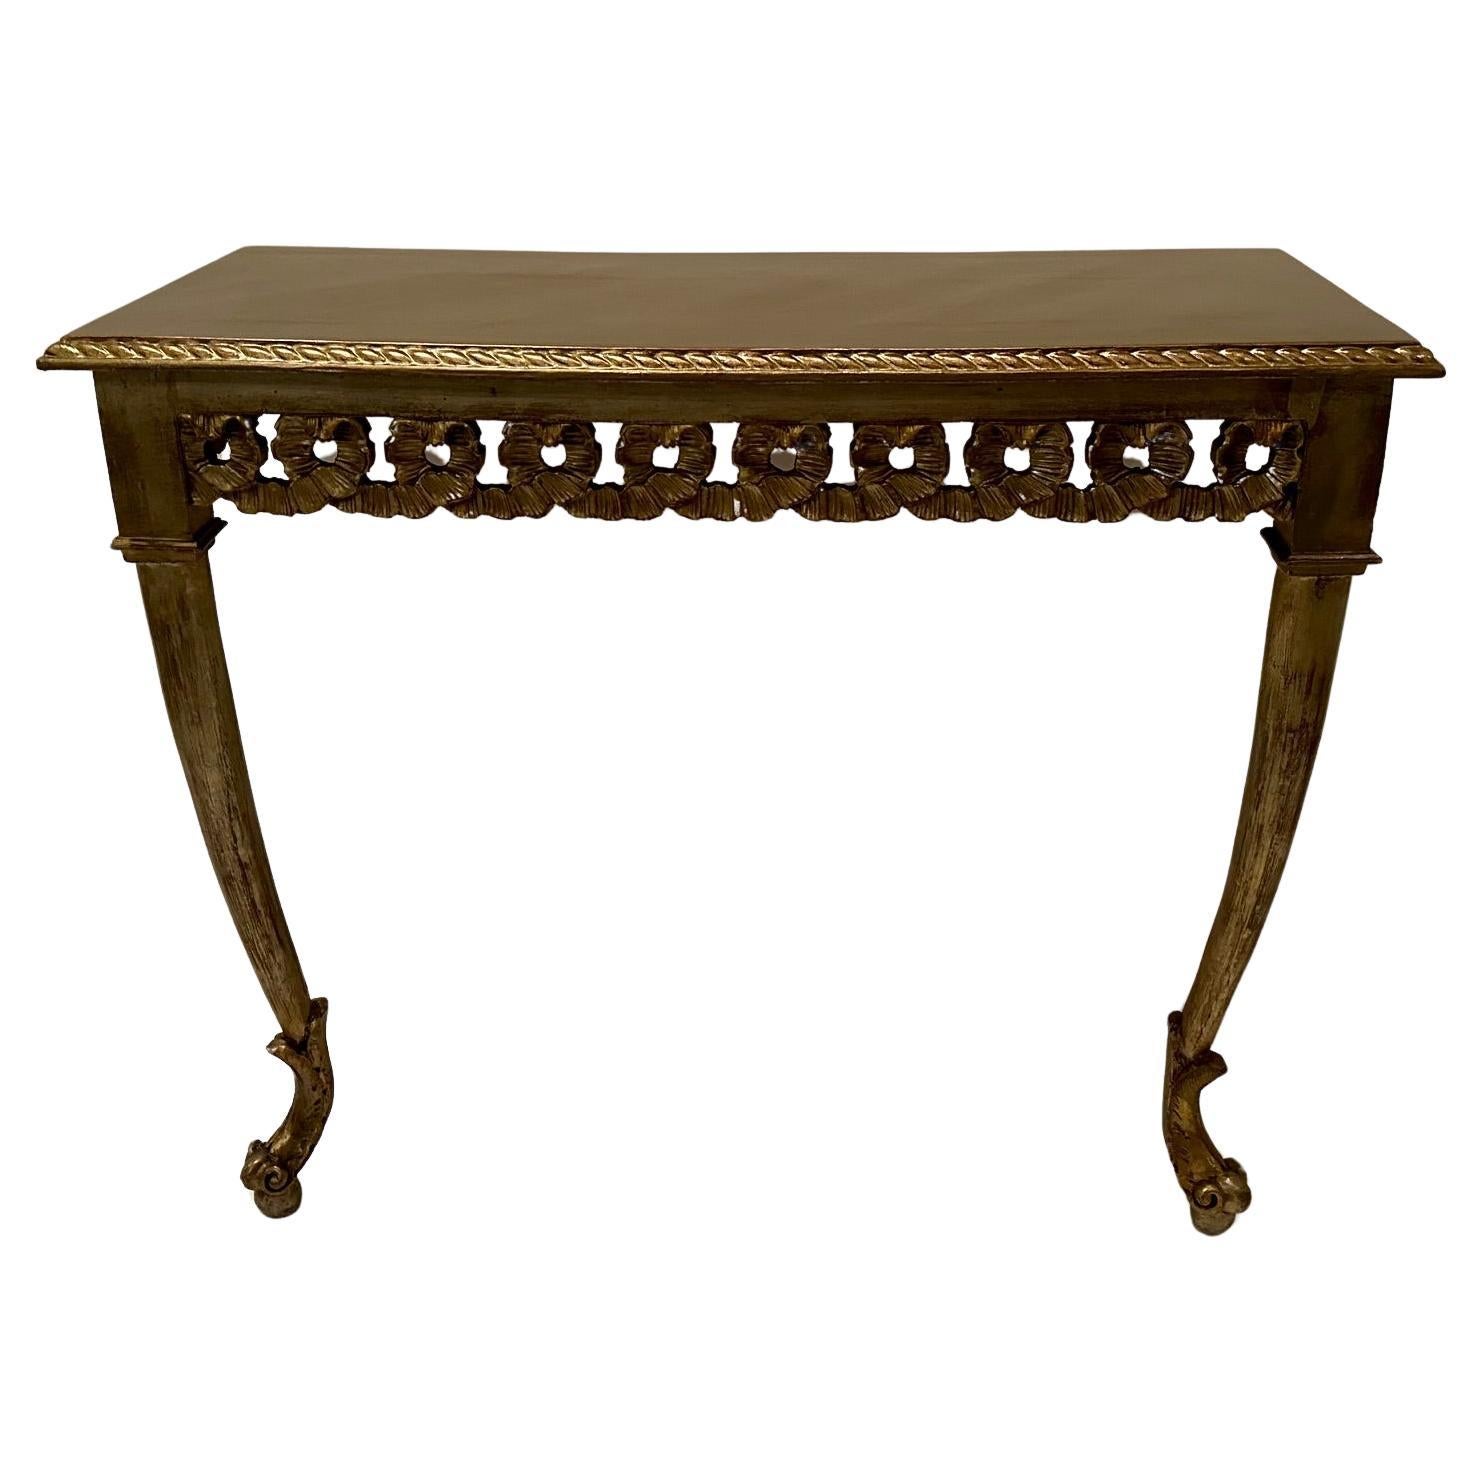 Carved Italian Gold & Silver Leaf Wall Mounted Console Table For Sale